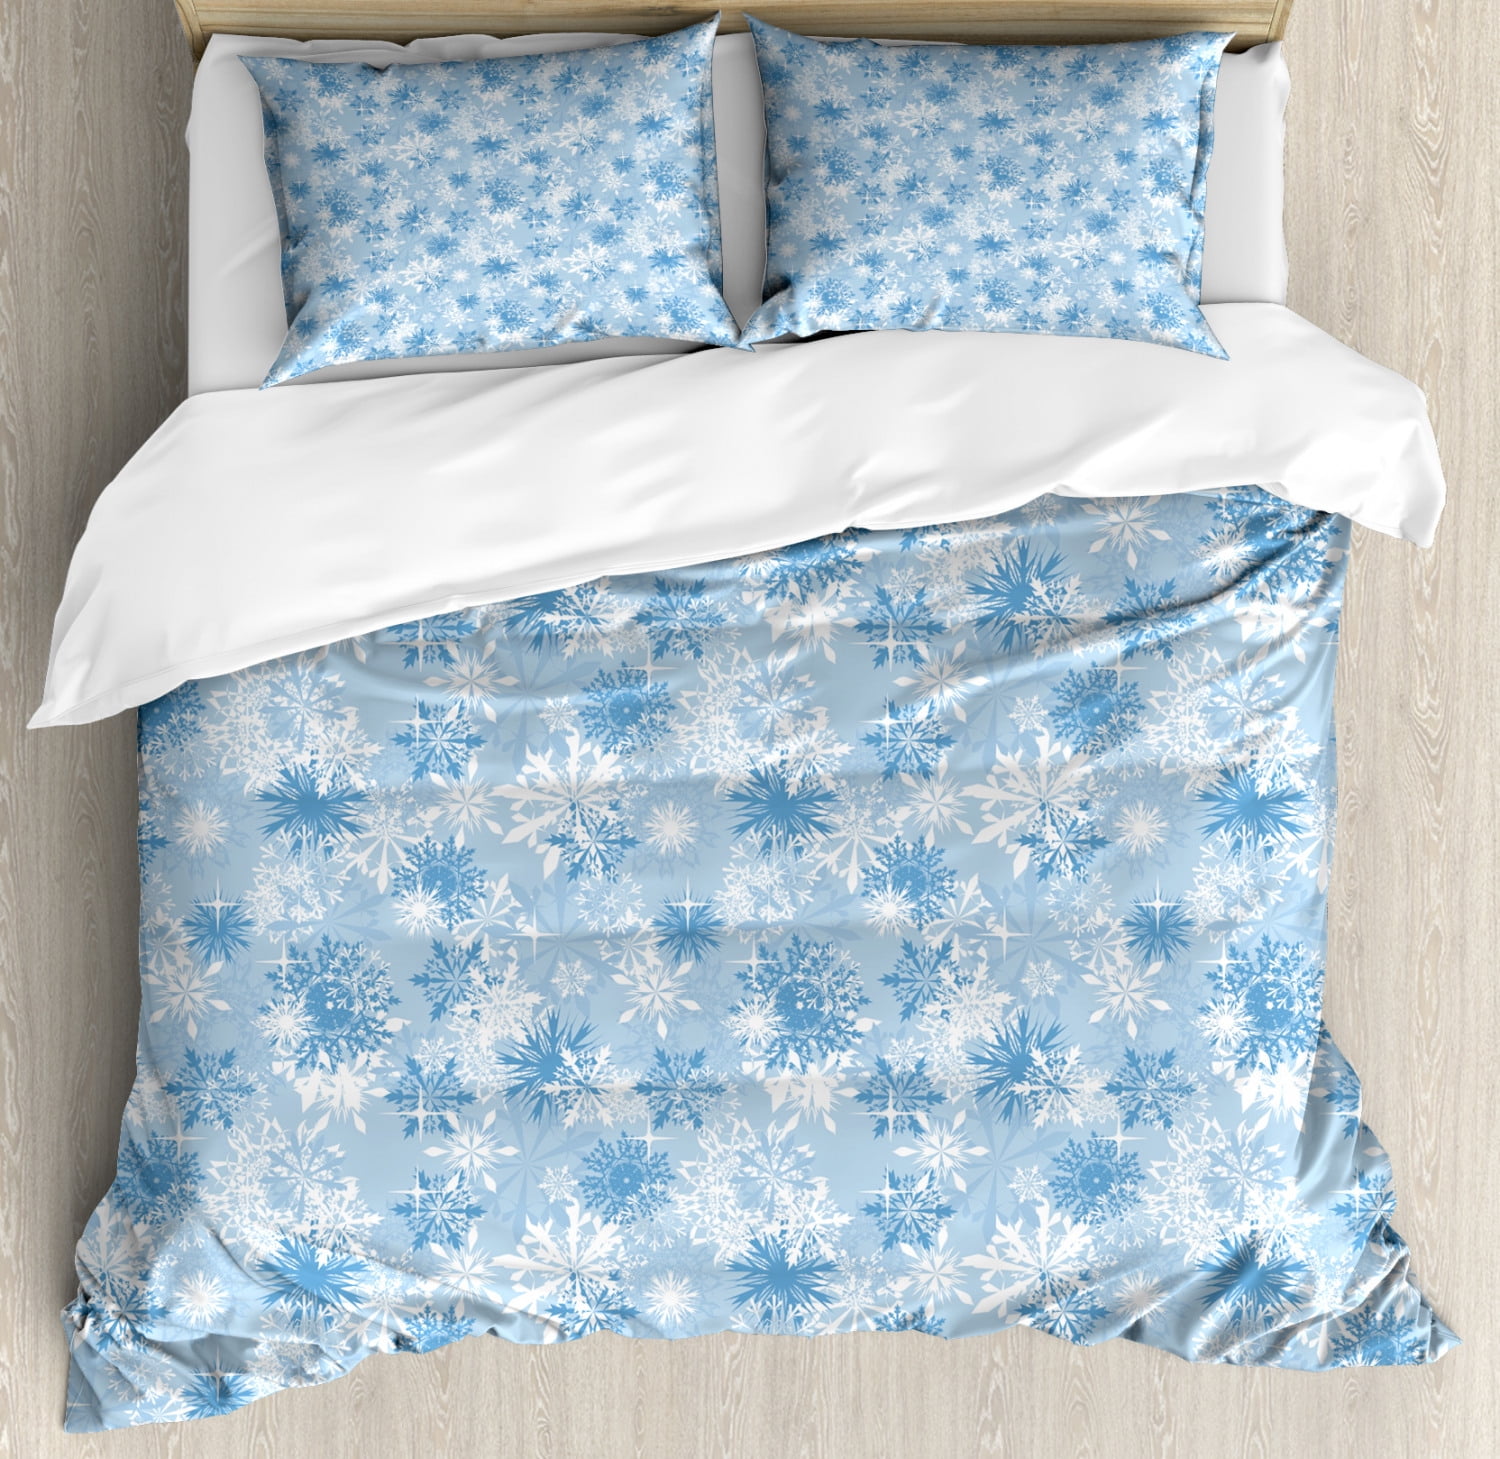 Snowflake Duvet Cover Set, Winter Holiday Illustration Christmas Snowflakes on Abstract